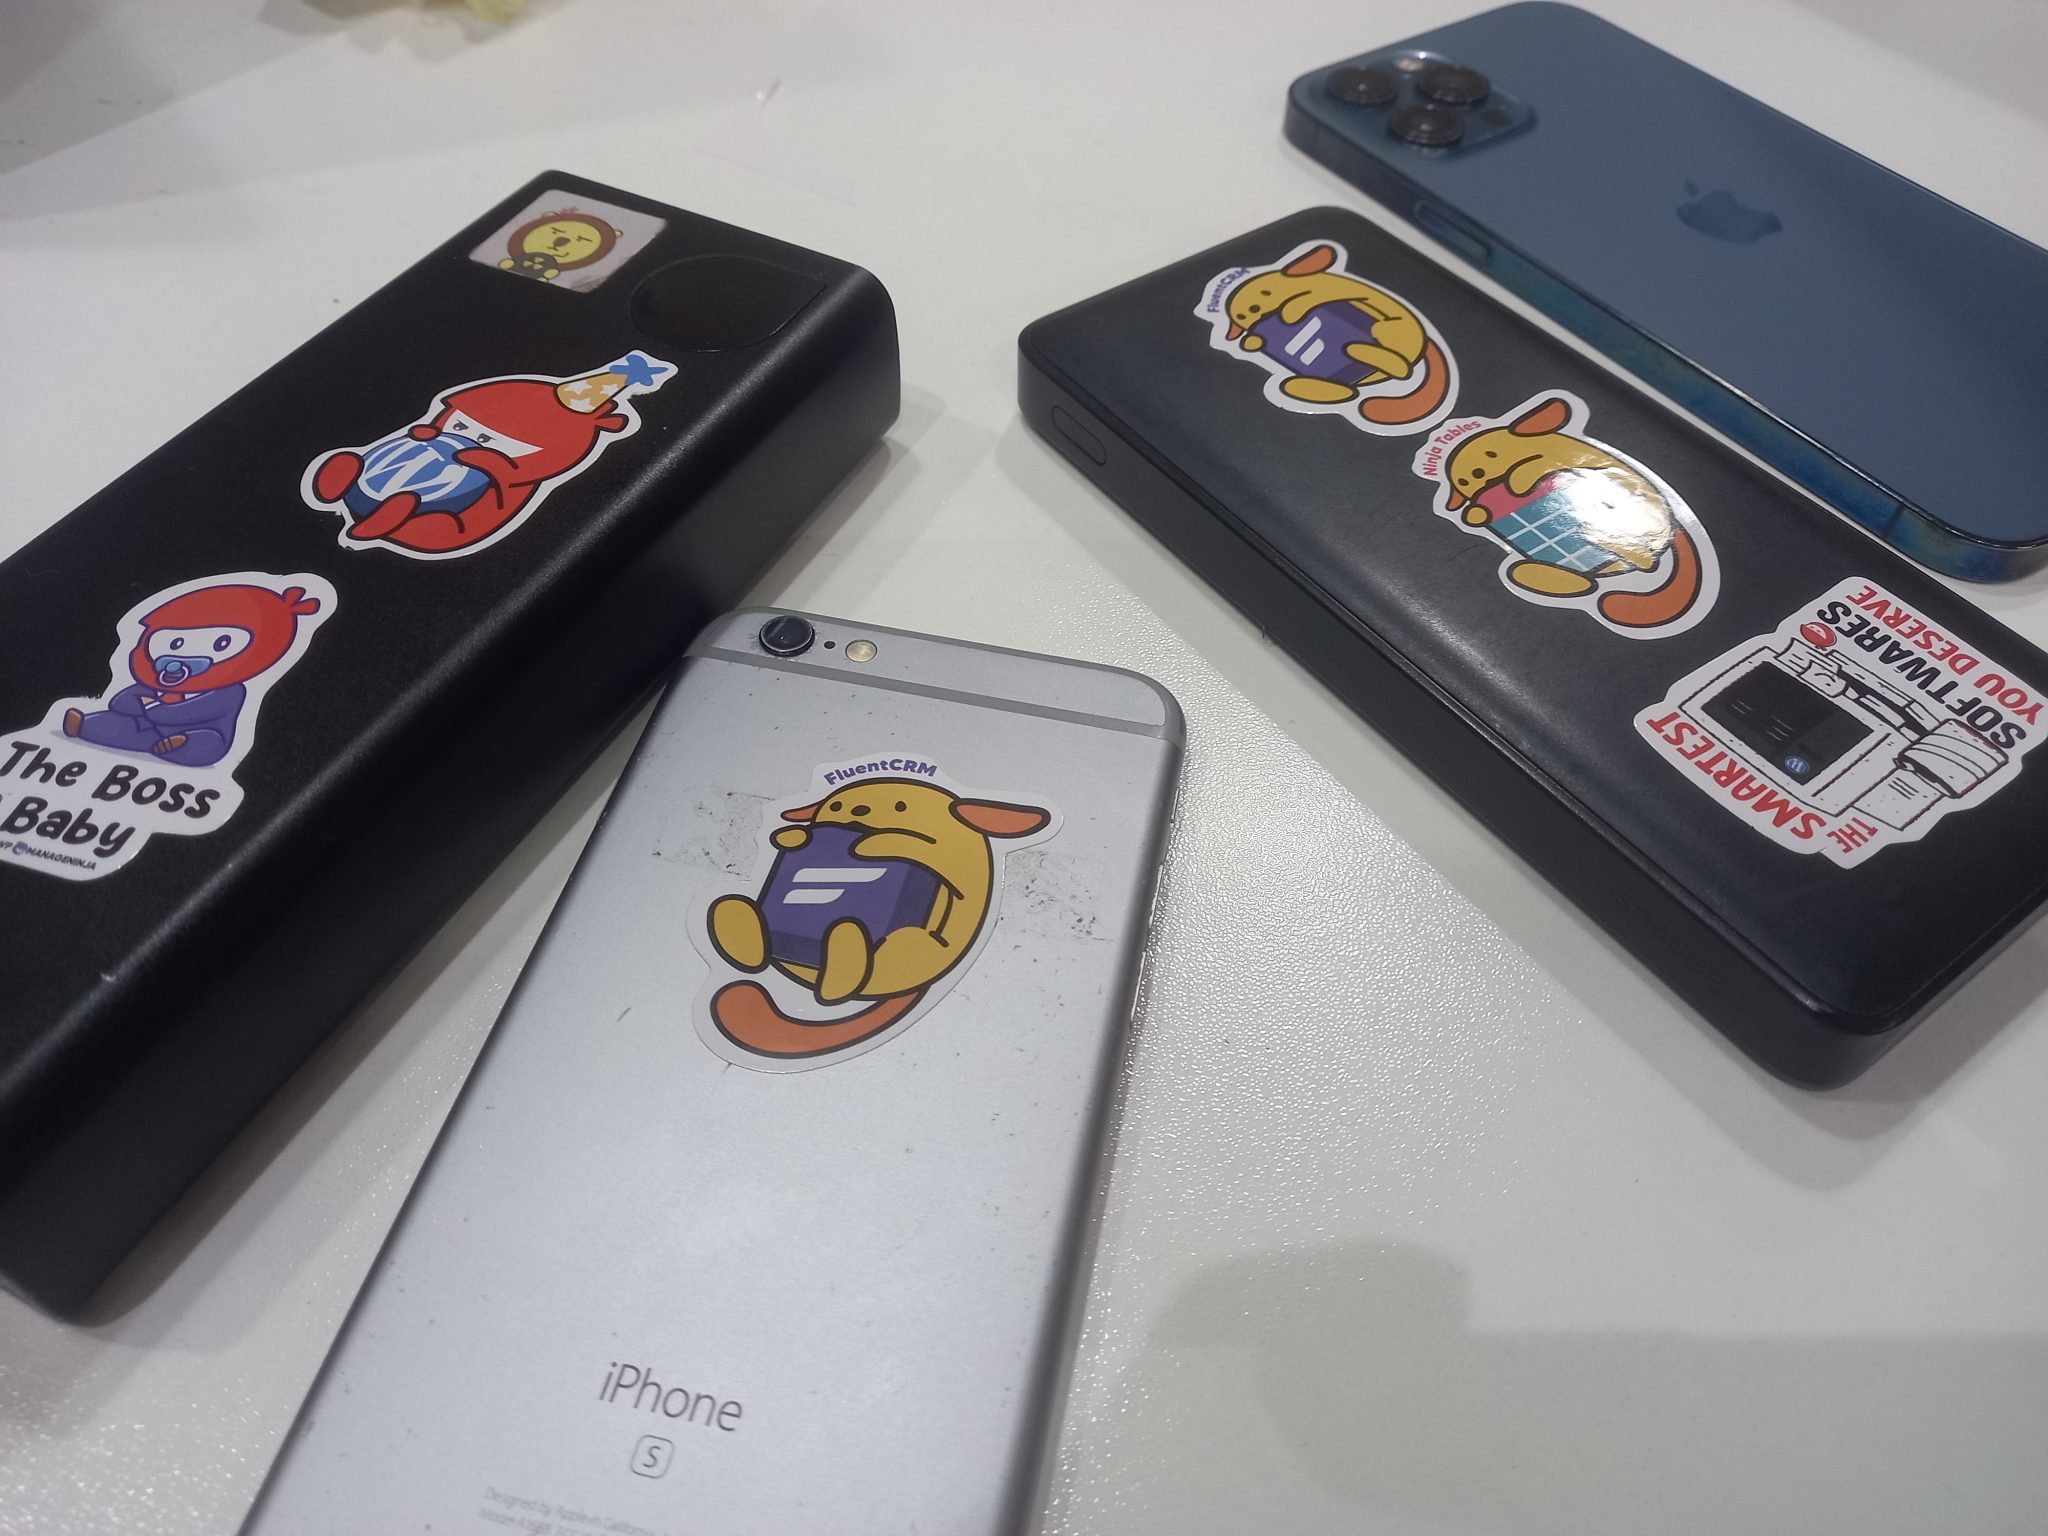 Two iphones and two external batteries with Wapuu stickers on them.